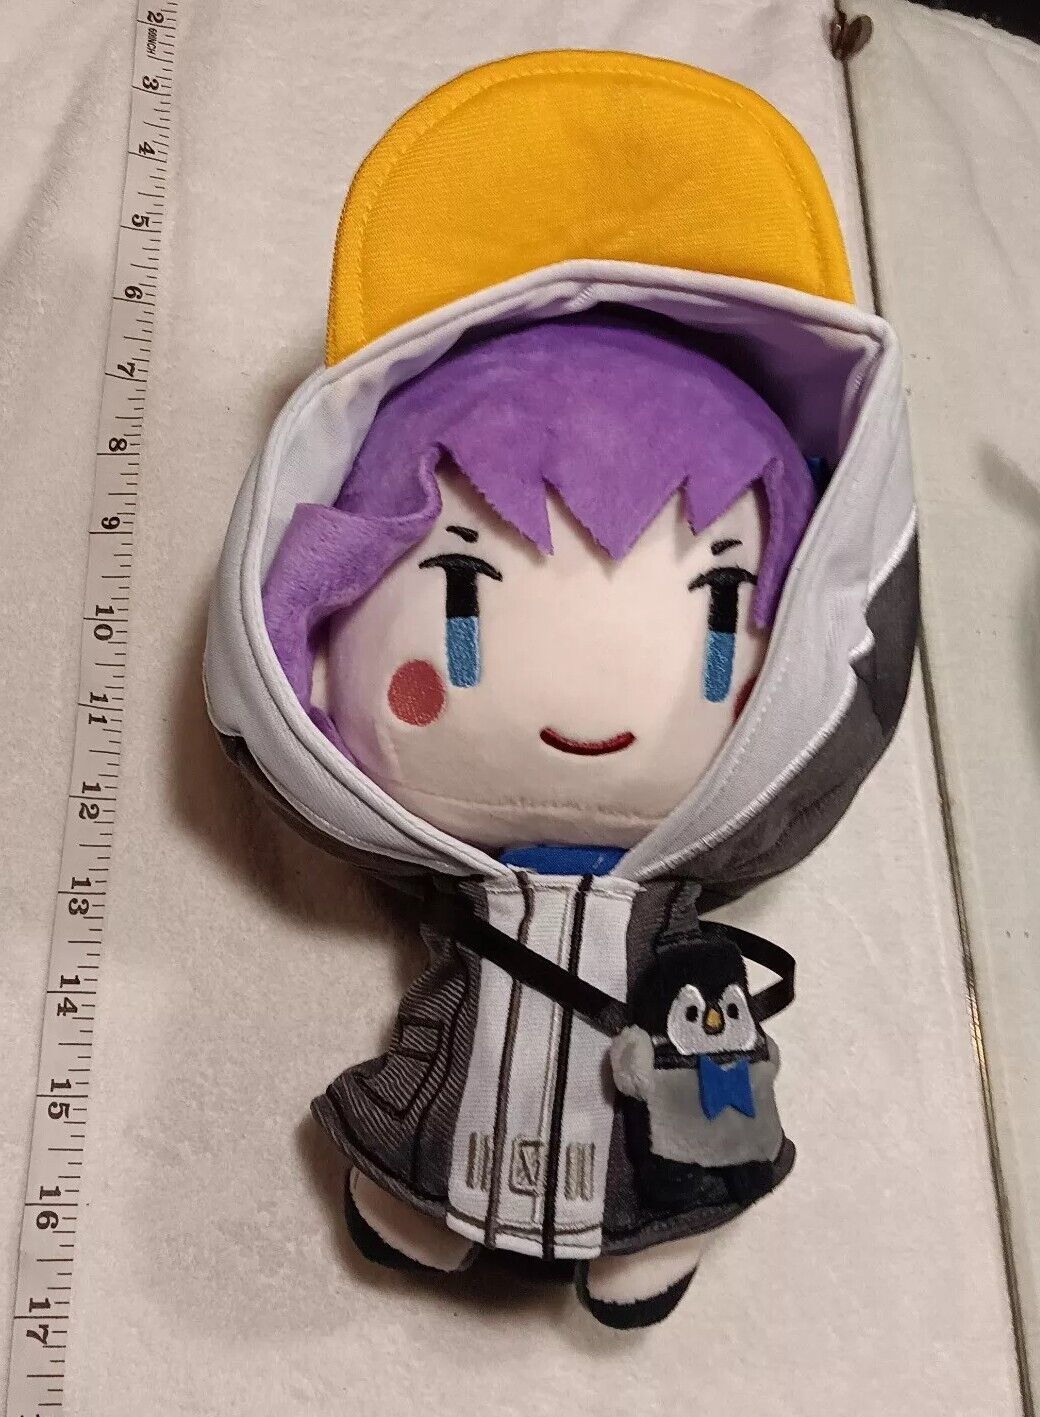 Fate/Grand Order Mysterious Meltlilith Meltrillis  Alter Ego  Plush Keychain